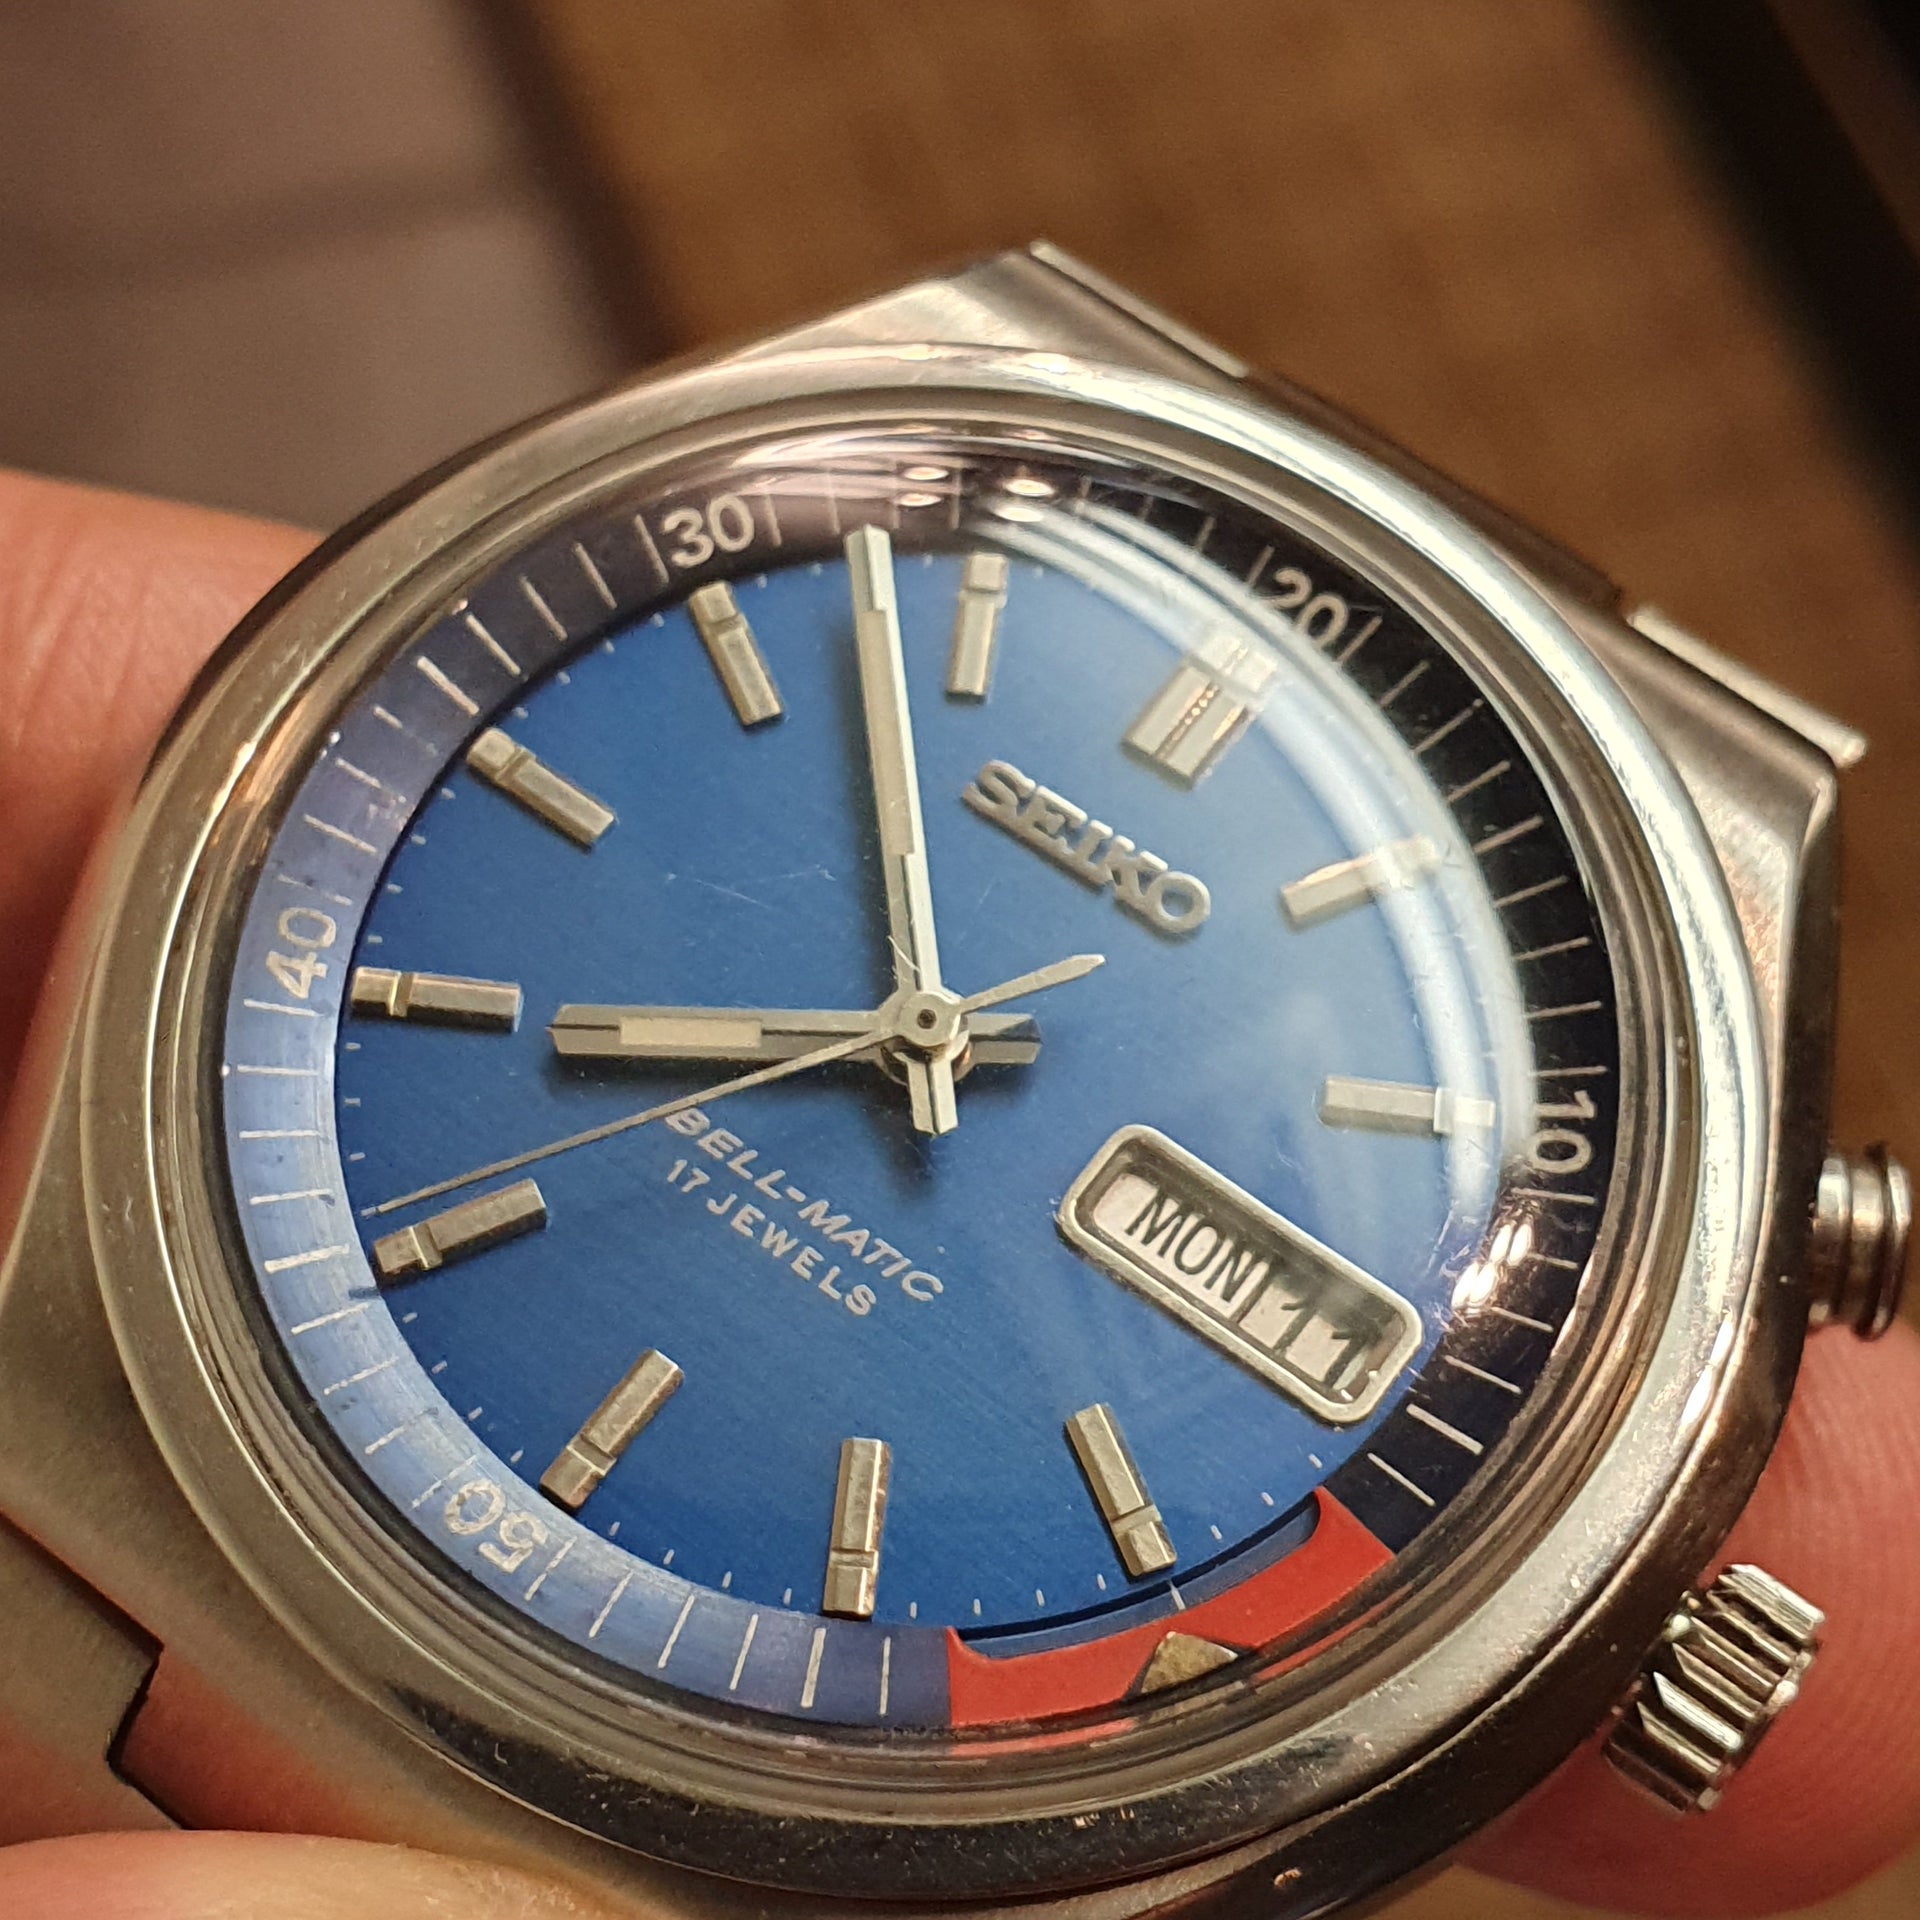 Seiko Bell Matic 4006-6040 | The Watch Site